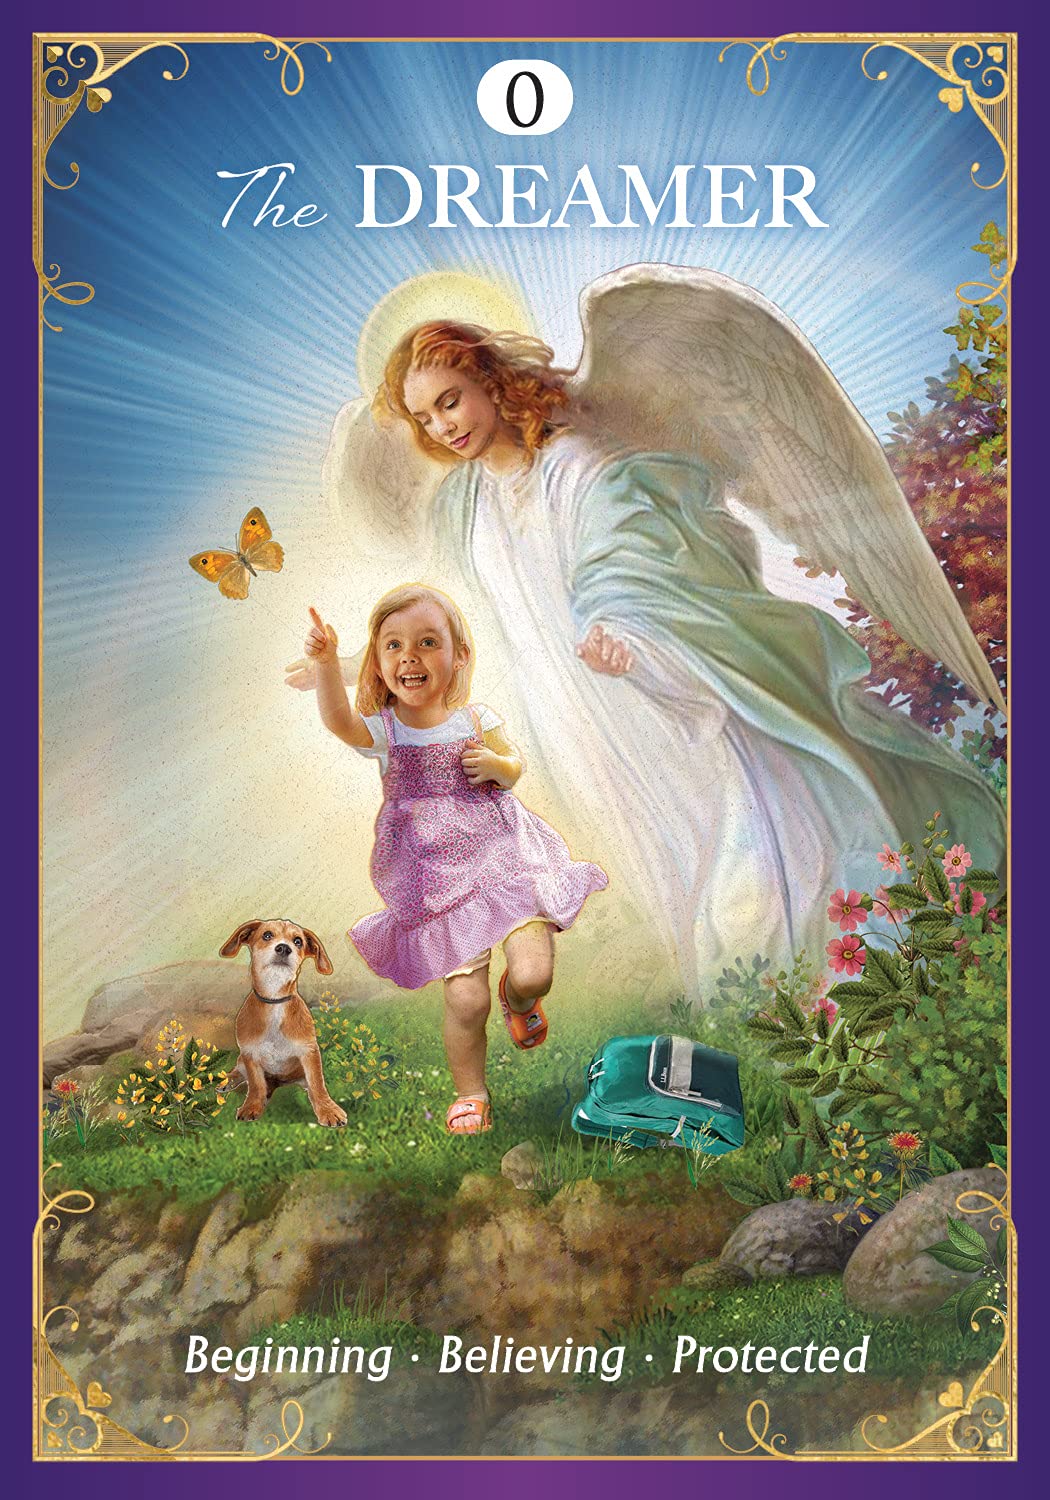 Load image into Gallery viewer, GUARDIAN ANGEL MESSAGES TAROT - VALENTINE, R.
